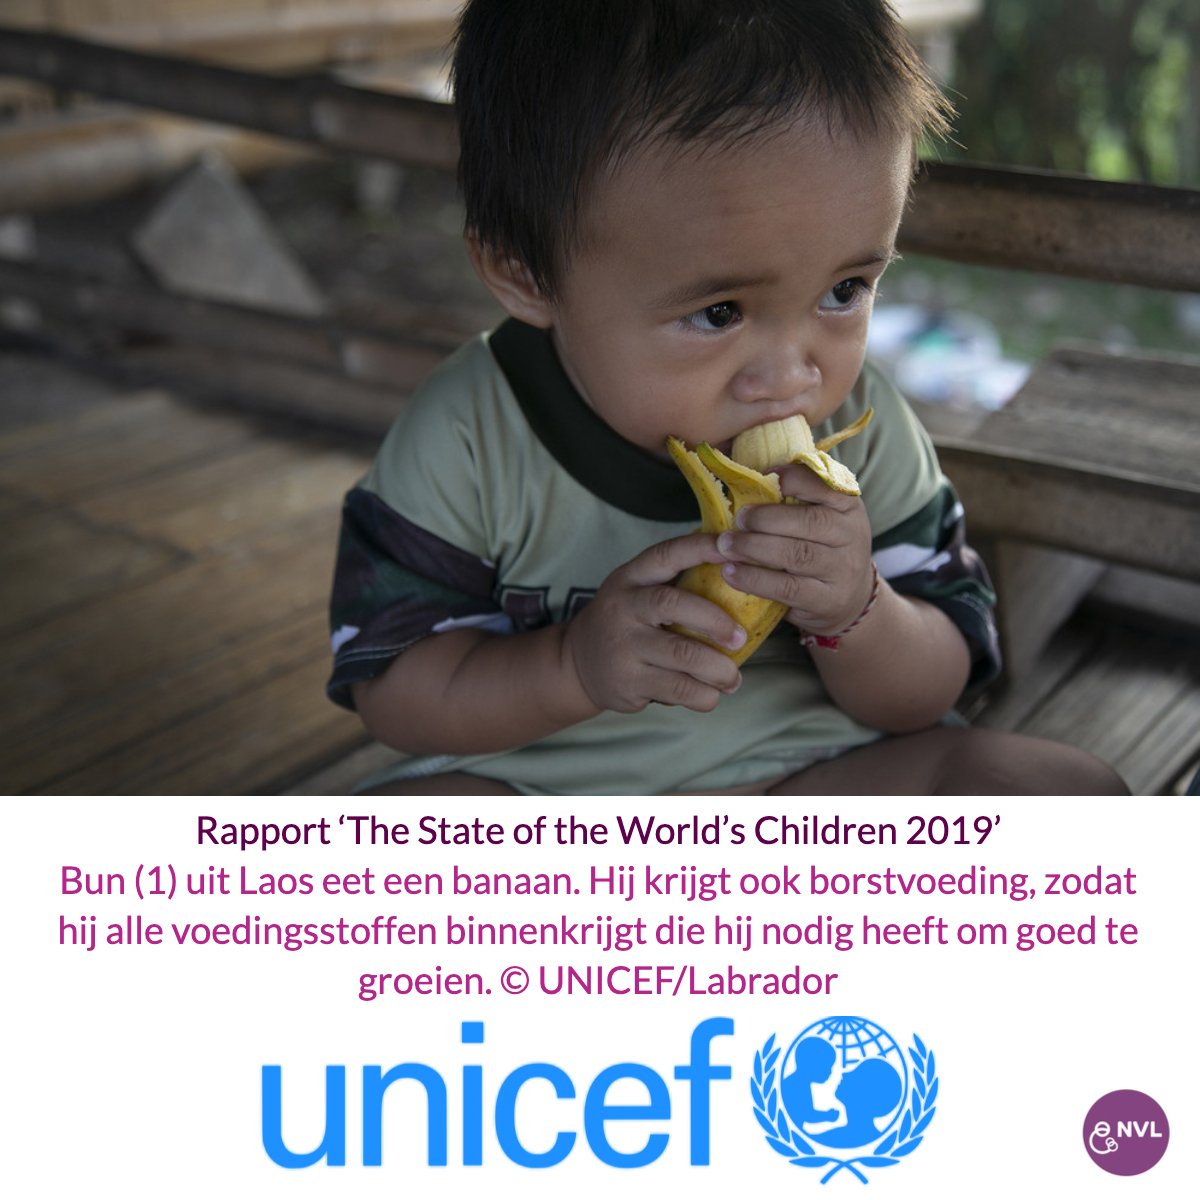 UNICEF publiceert rapport ‘The State of the World’s Children 2019’